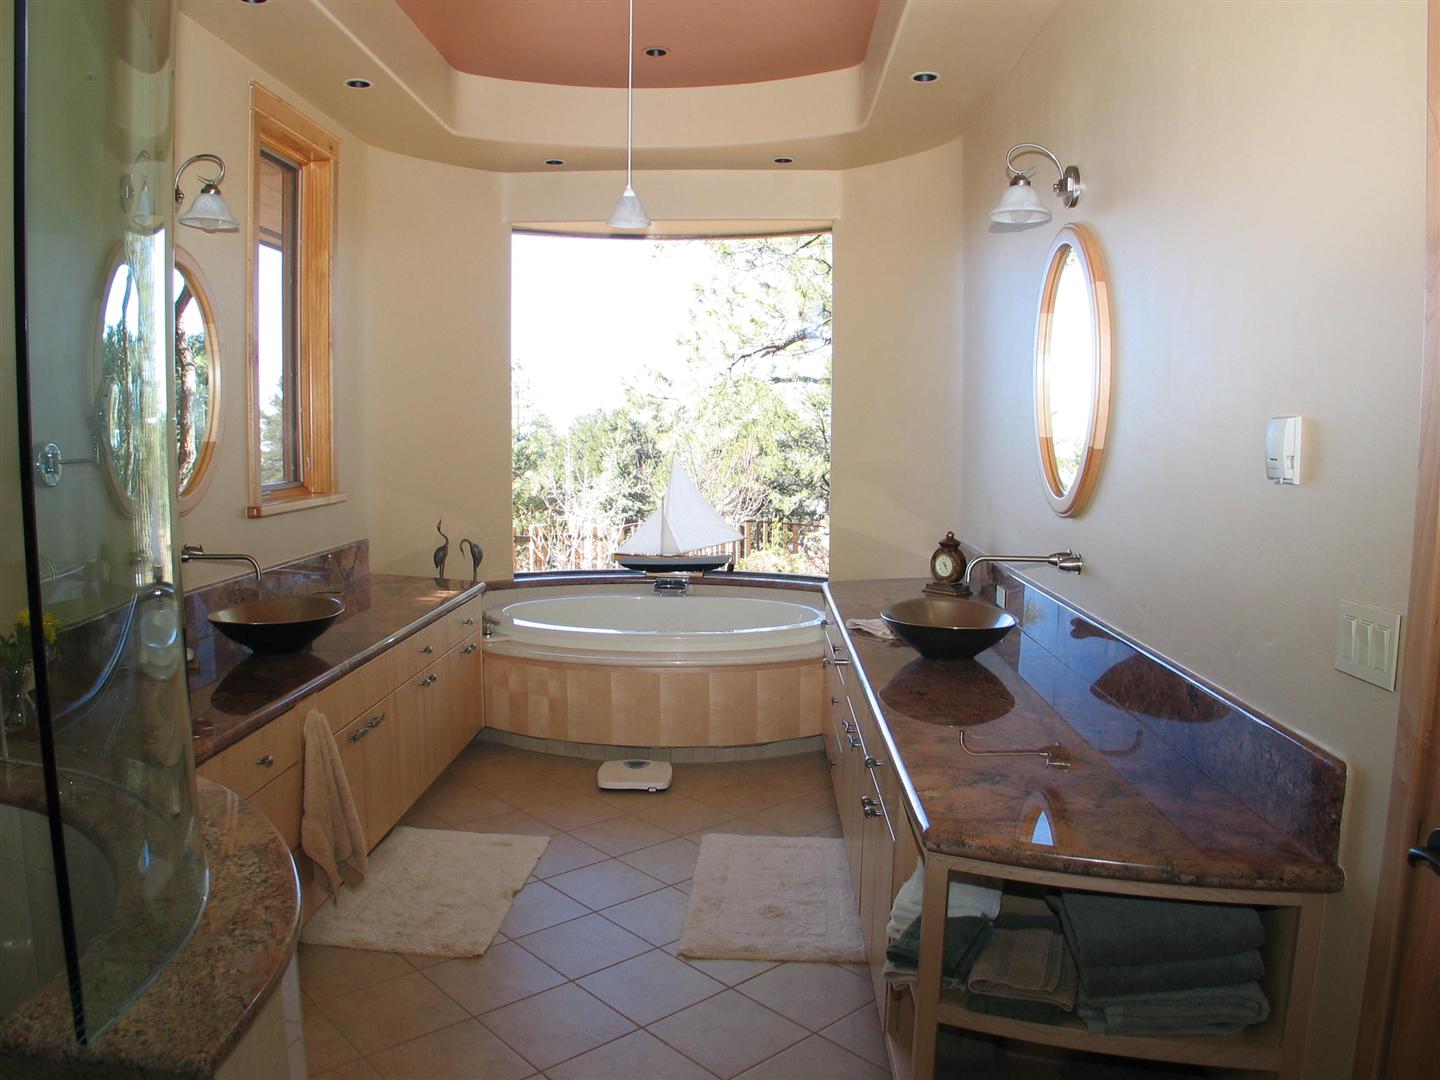 finished bathrooms project gallery bathroom photo gallery title=